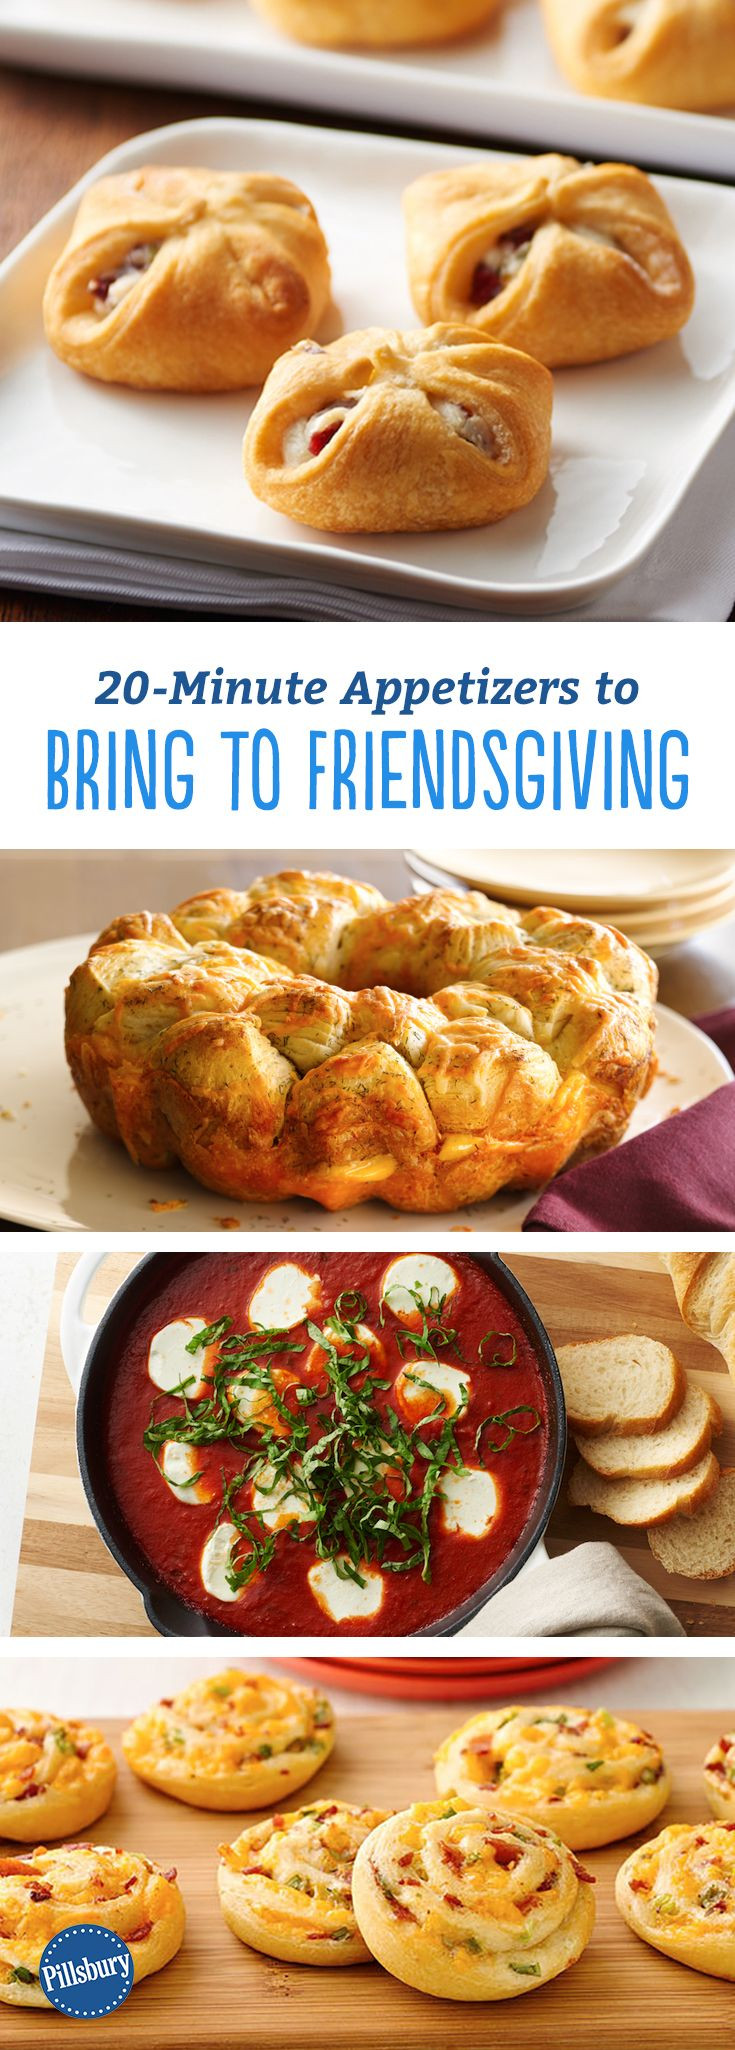 Thanksgiving Appetizers Pinterest
 20 Minute Appetizers to Bring to Friendsgiving